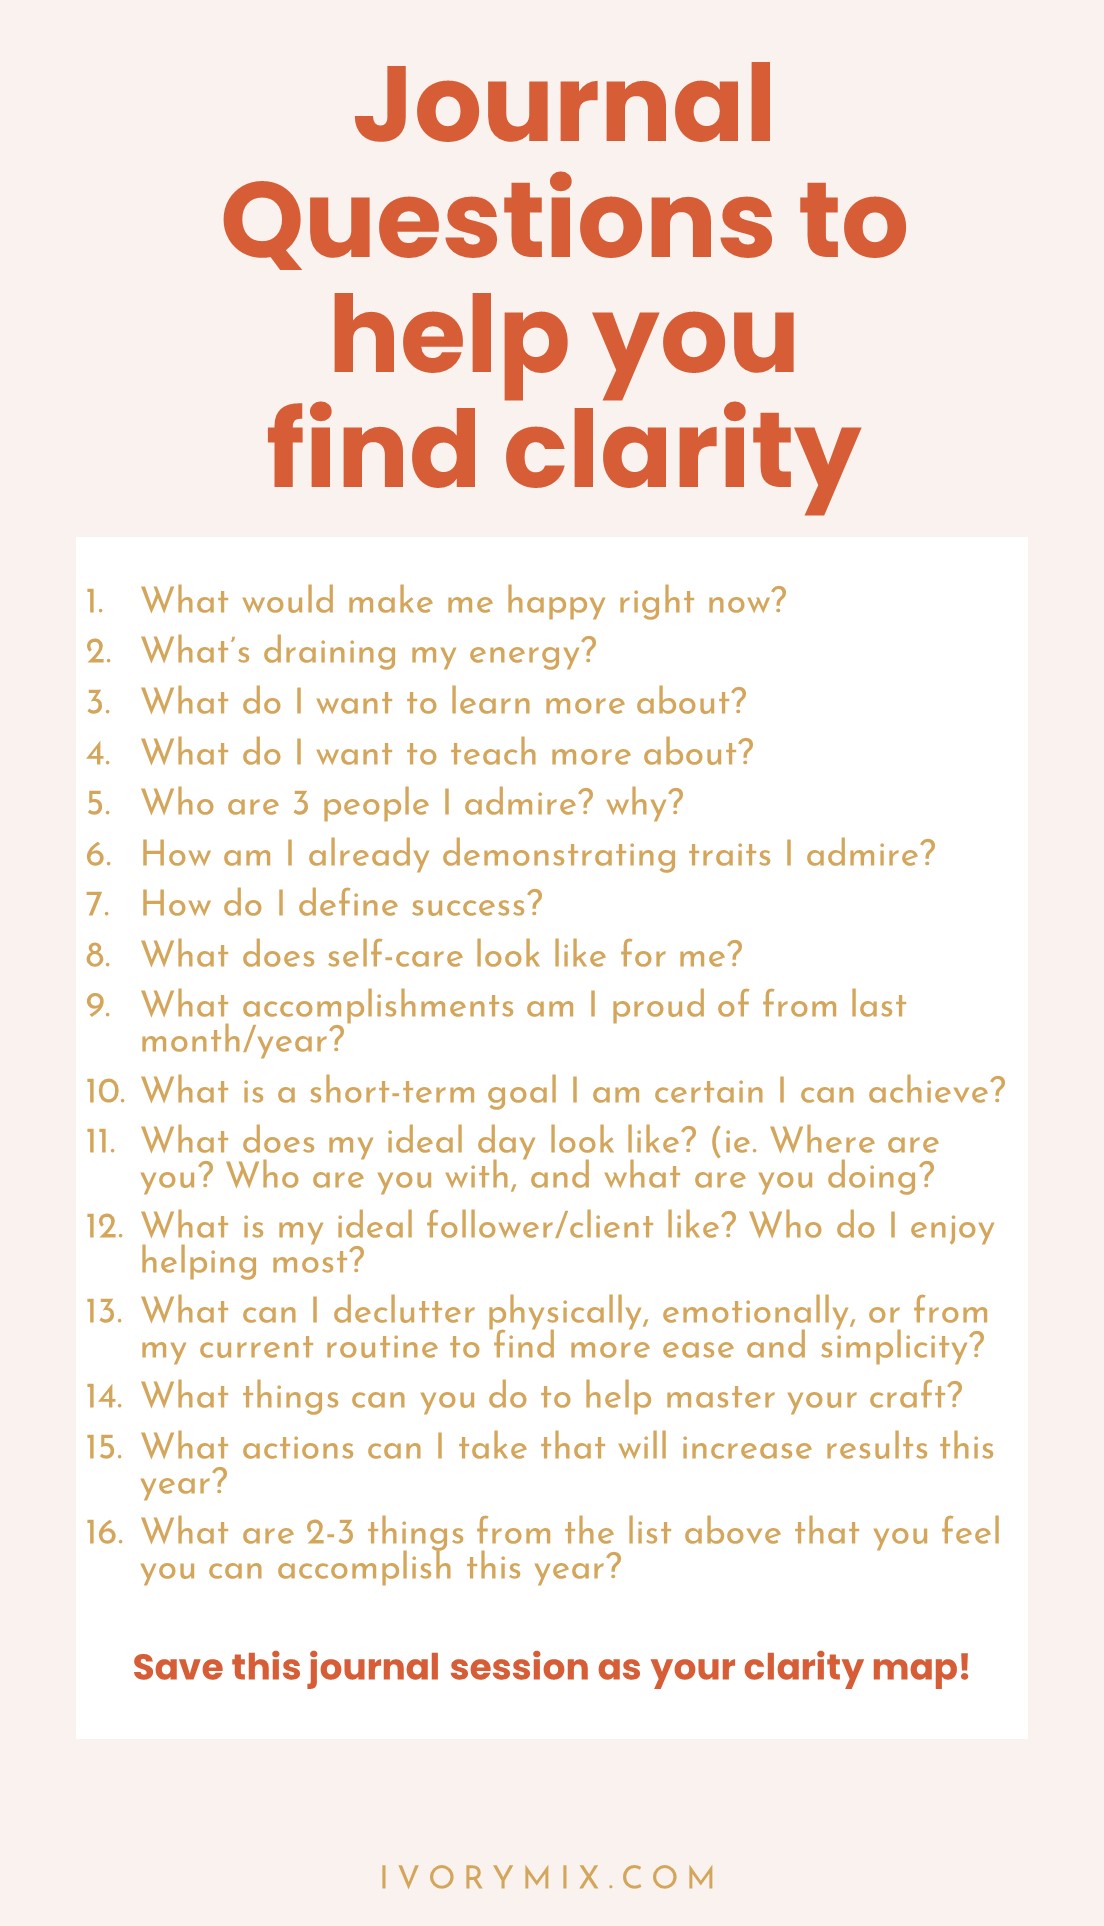 16 Questions to help you find clarity in life as a content creator